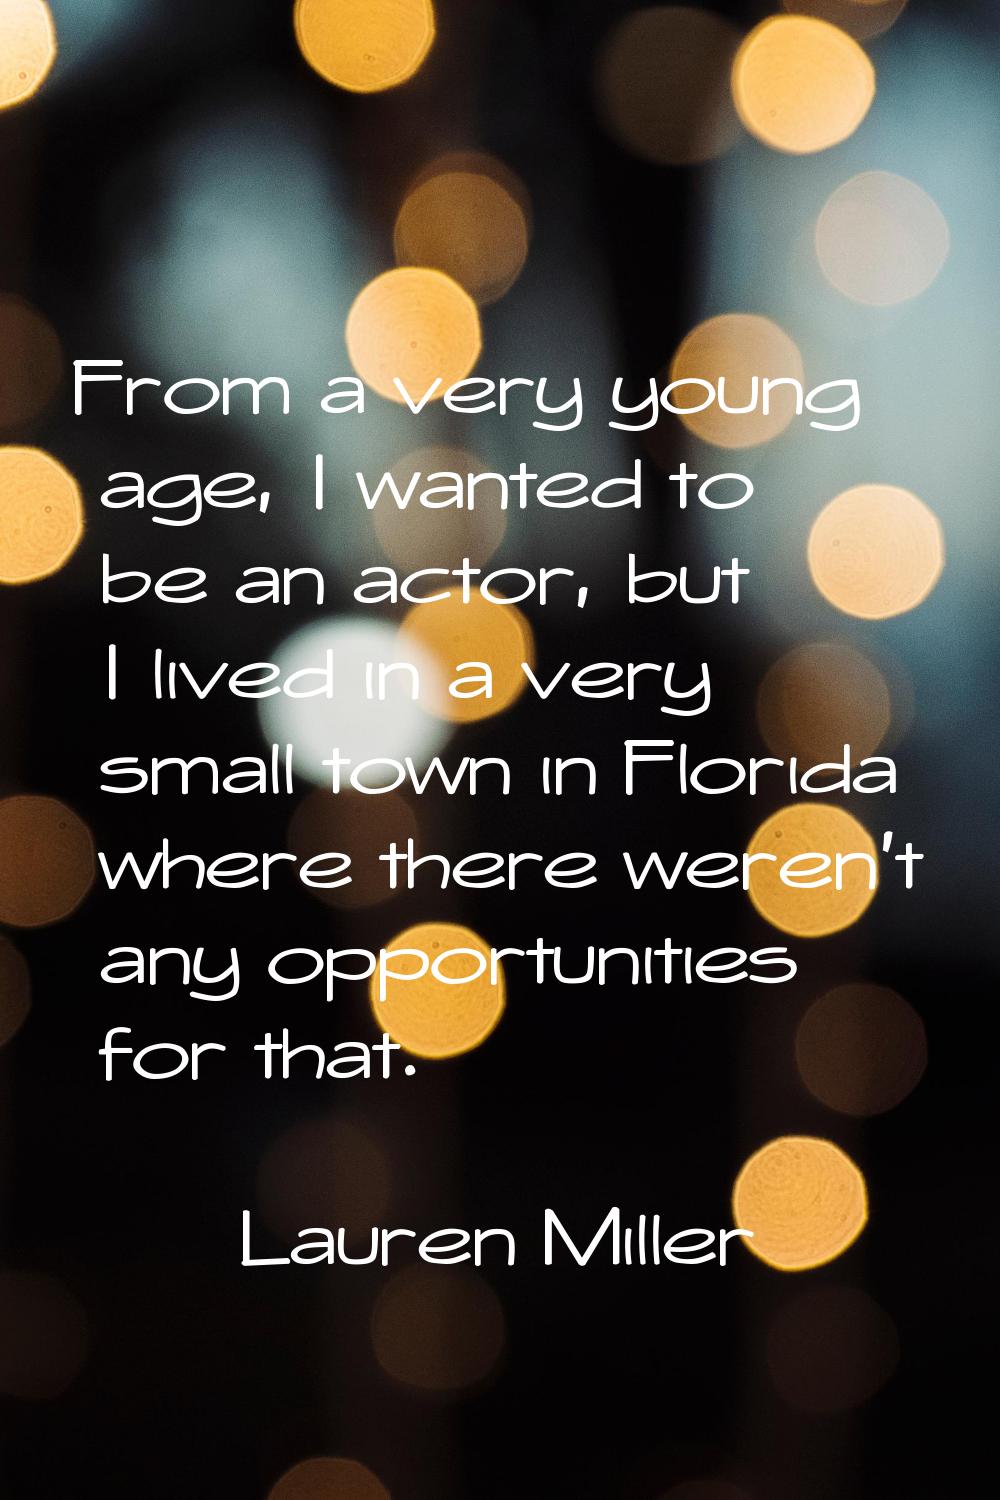 From a very young age, I wanted to be an actor, but I lived in a very small town in Florida where t